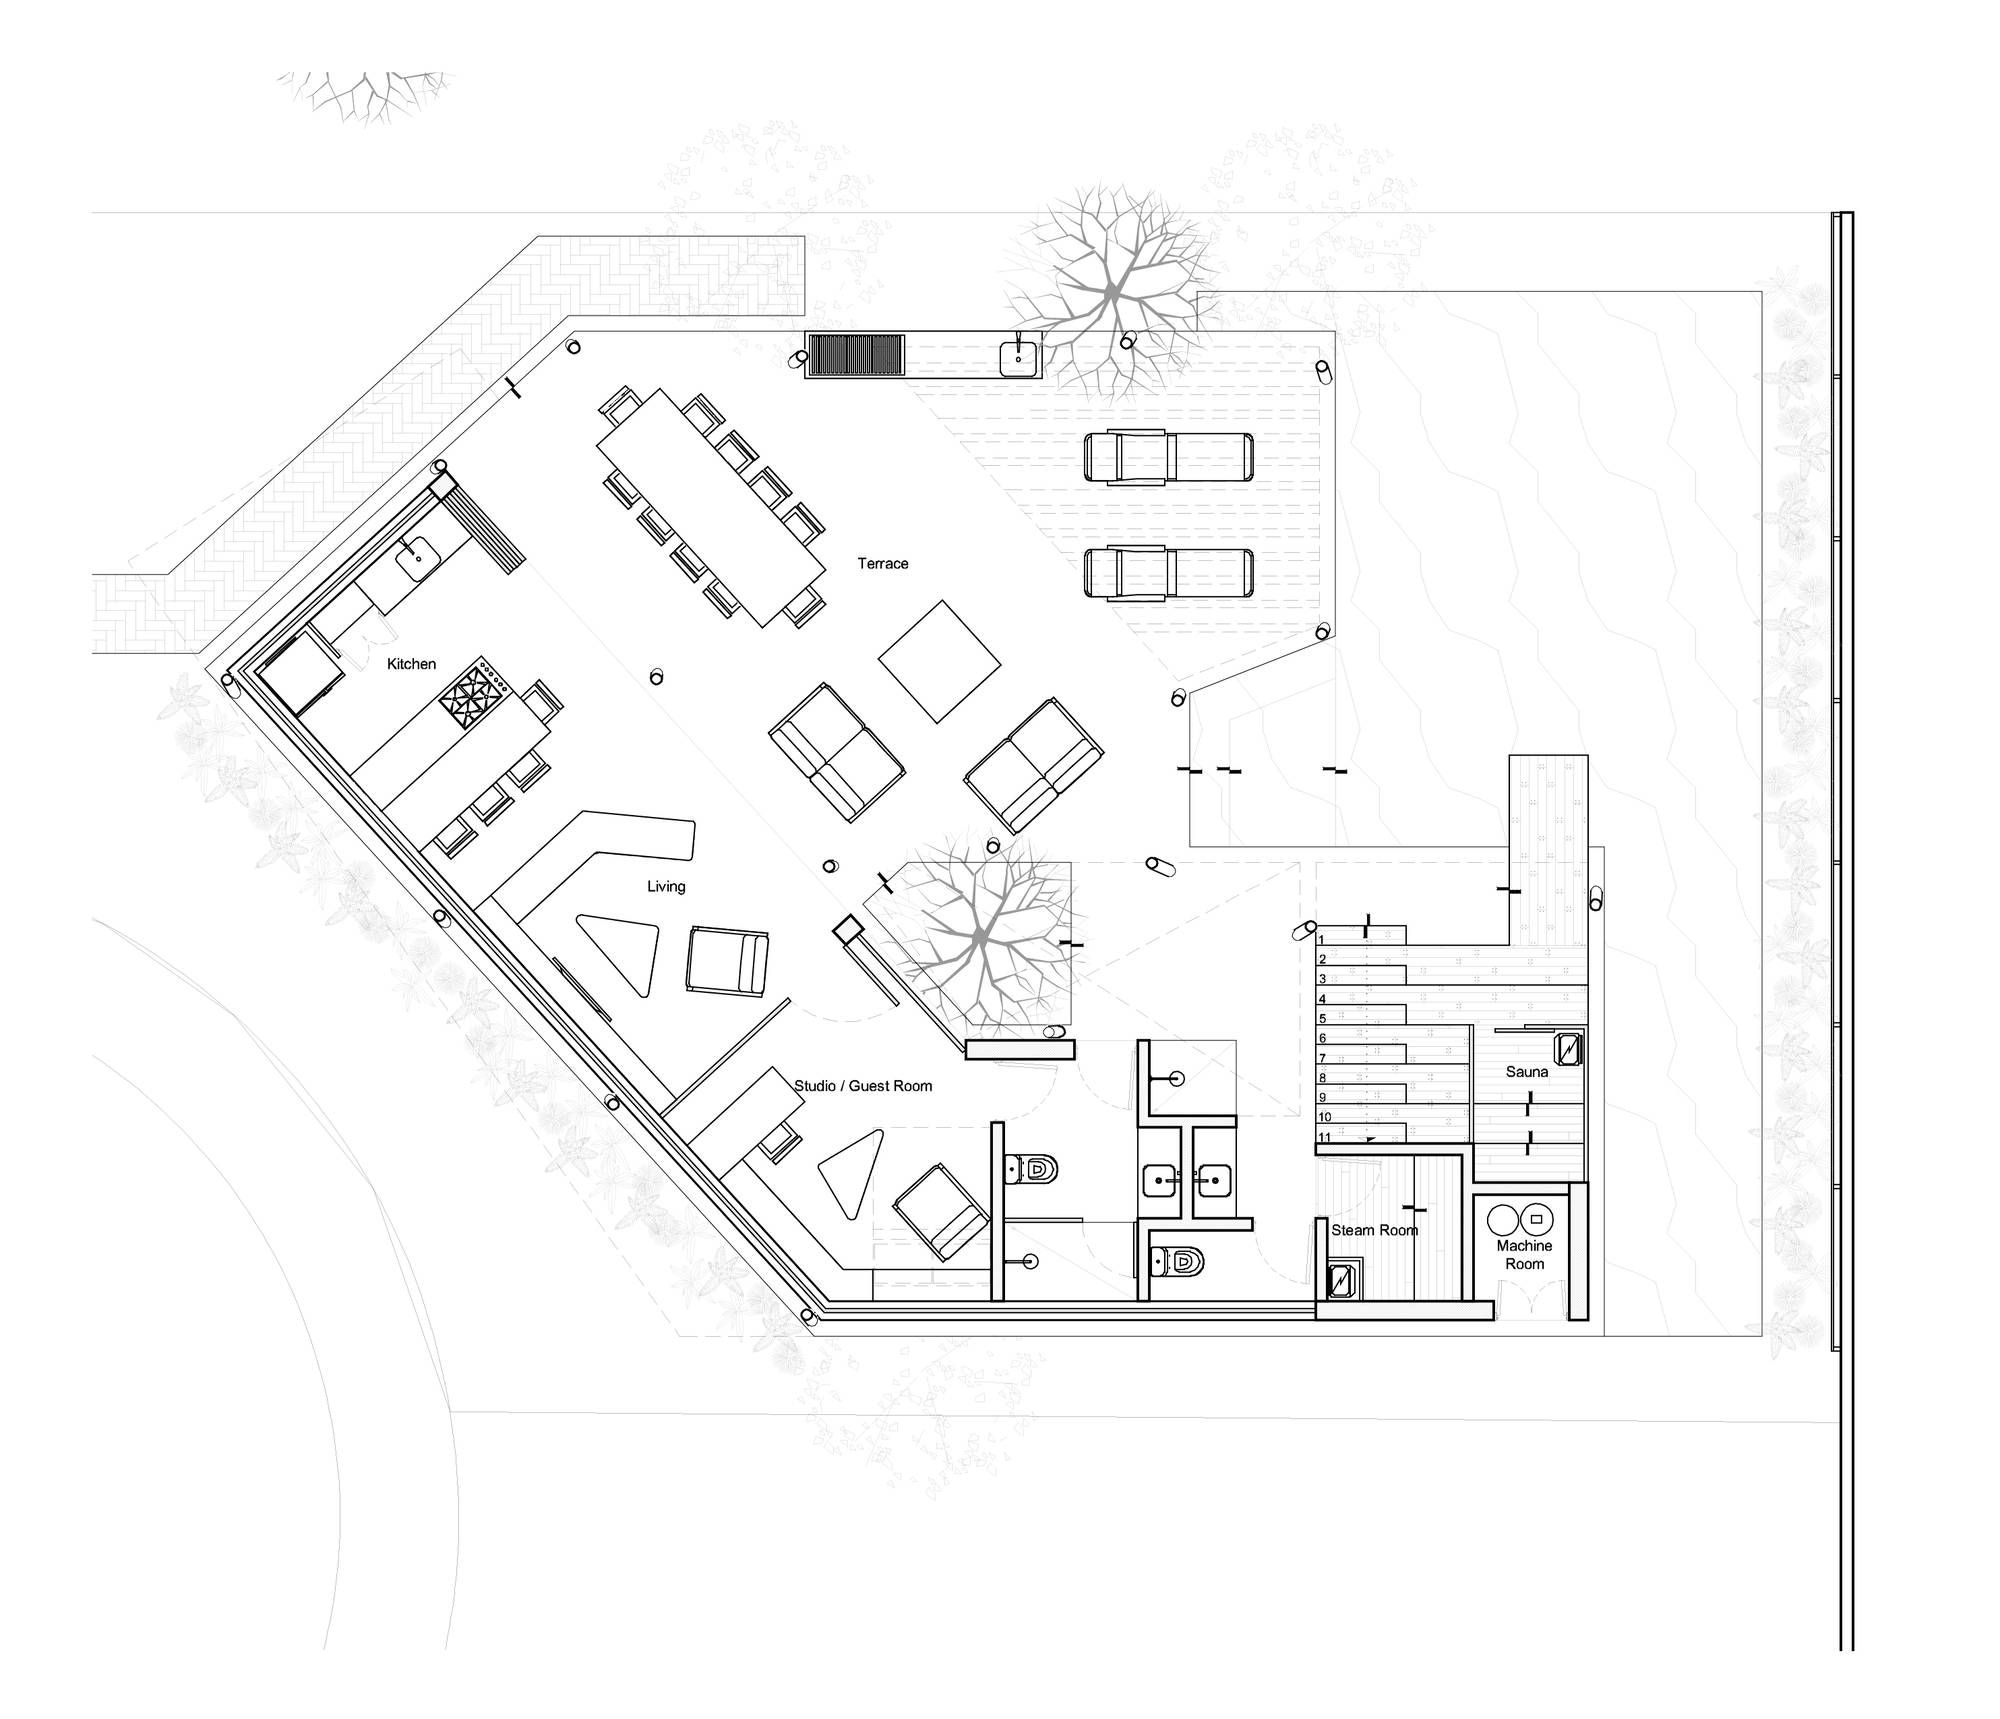 Ground-level-floor-plan-of-Barrenechea-House-Extension-designed-by-Cafeina-Design-in-Santa-Cruc-Bolivia-75515